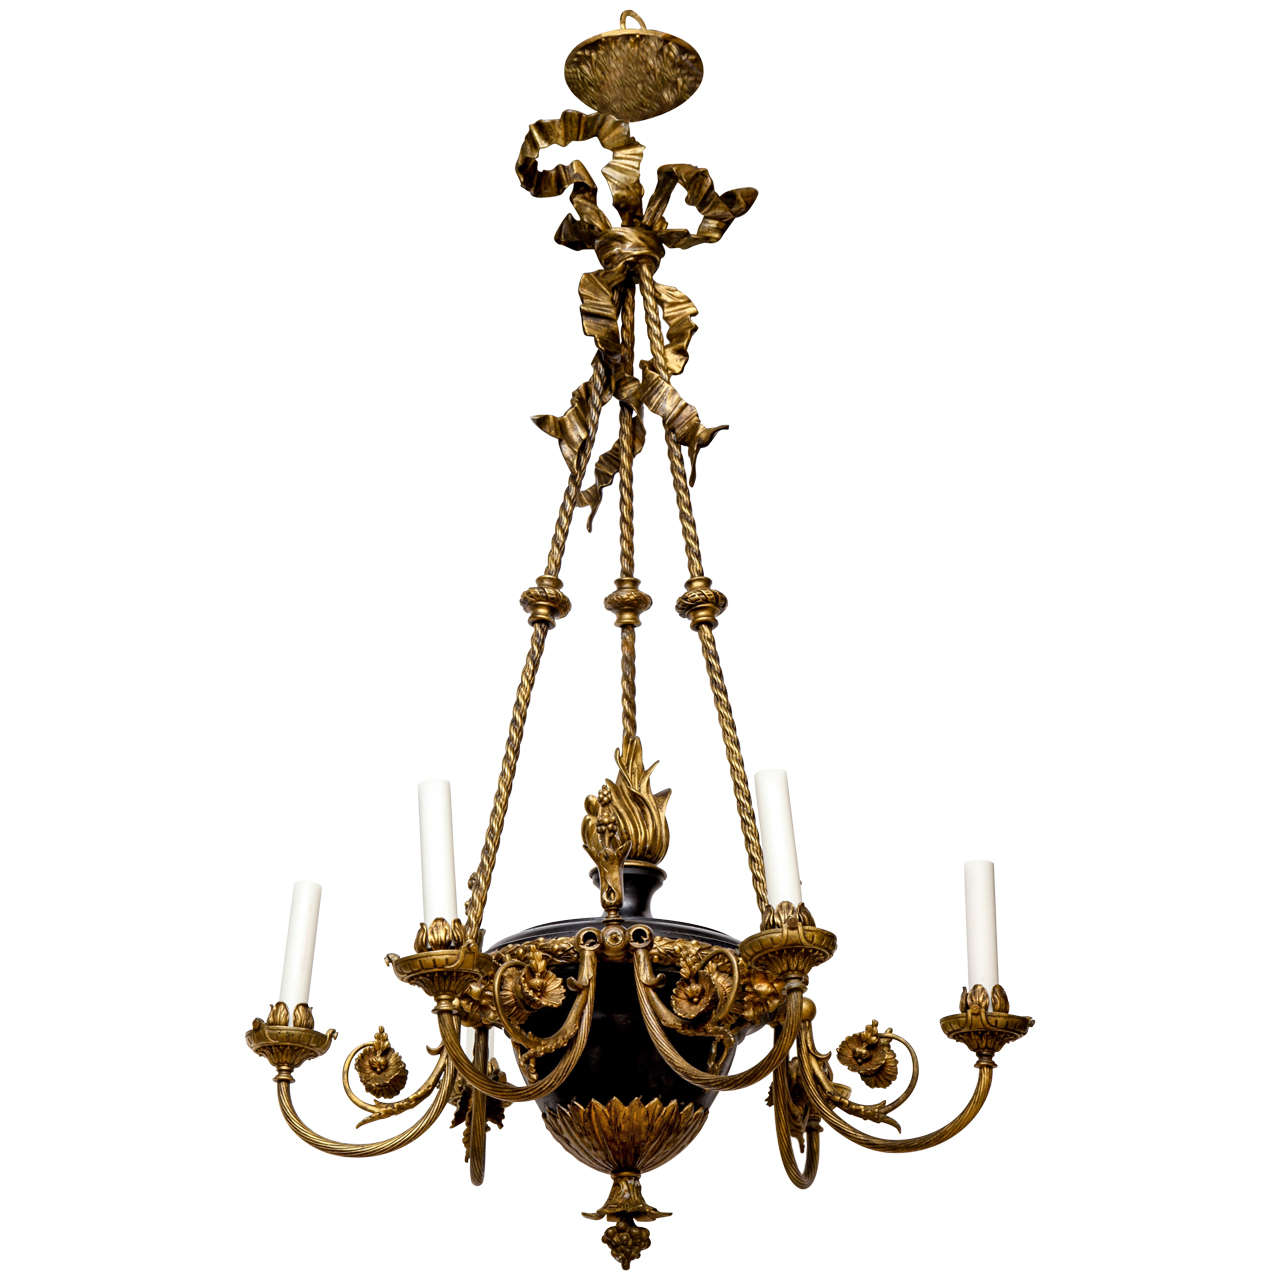 A Six Light French Empire Tole Chandelier